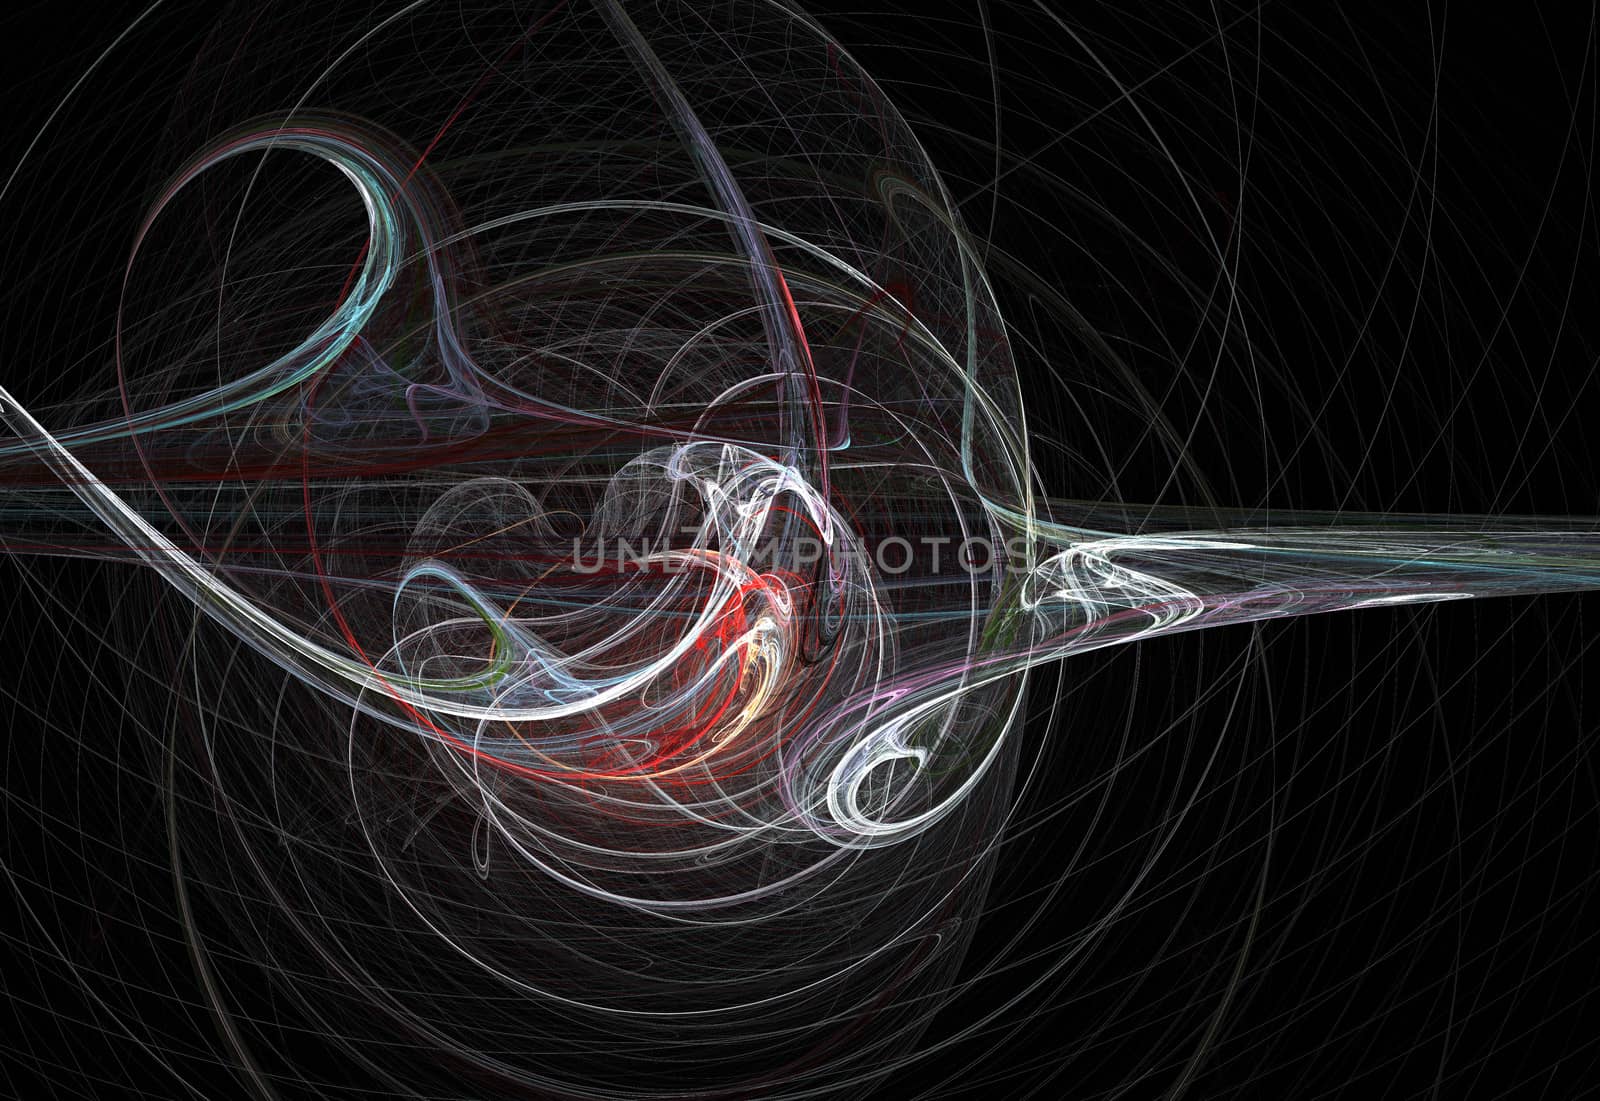 Abstract fractal background, best viewed many details when viewed at full size